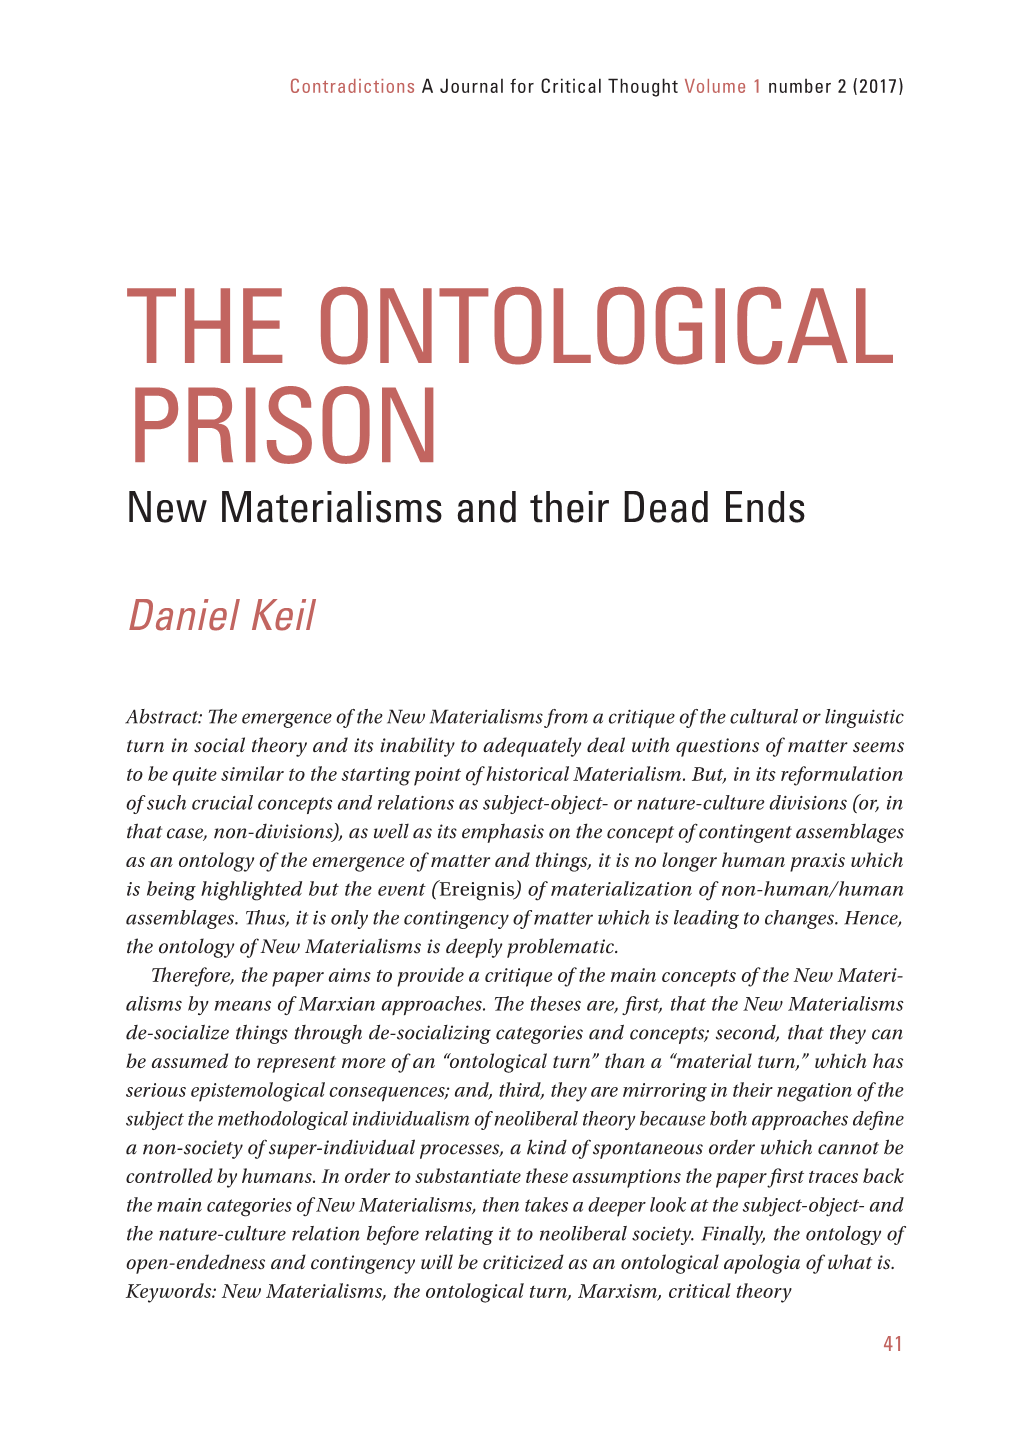 THE ONTOLOGICAL PRISON New Materialisms and Their Dead Ends